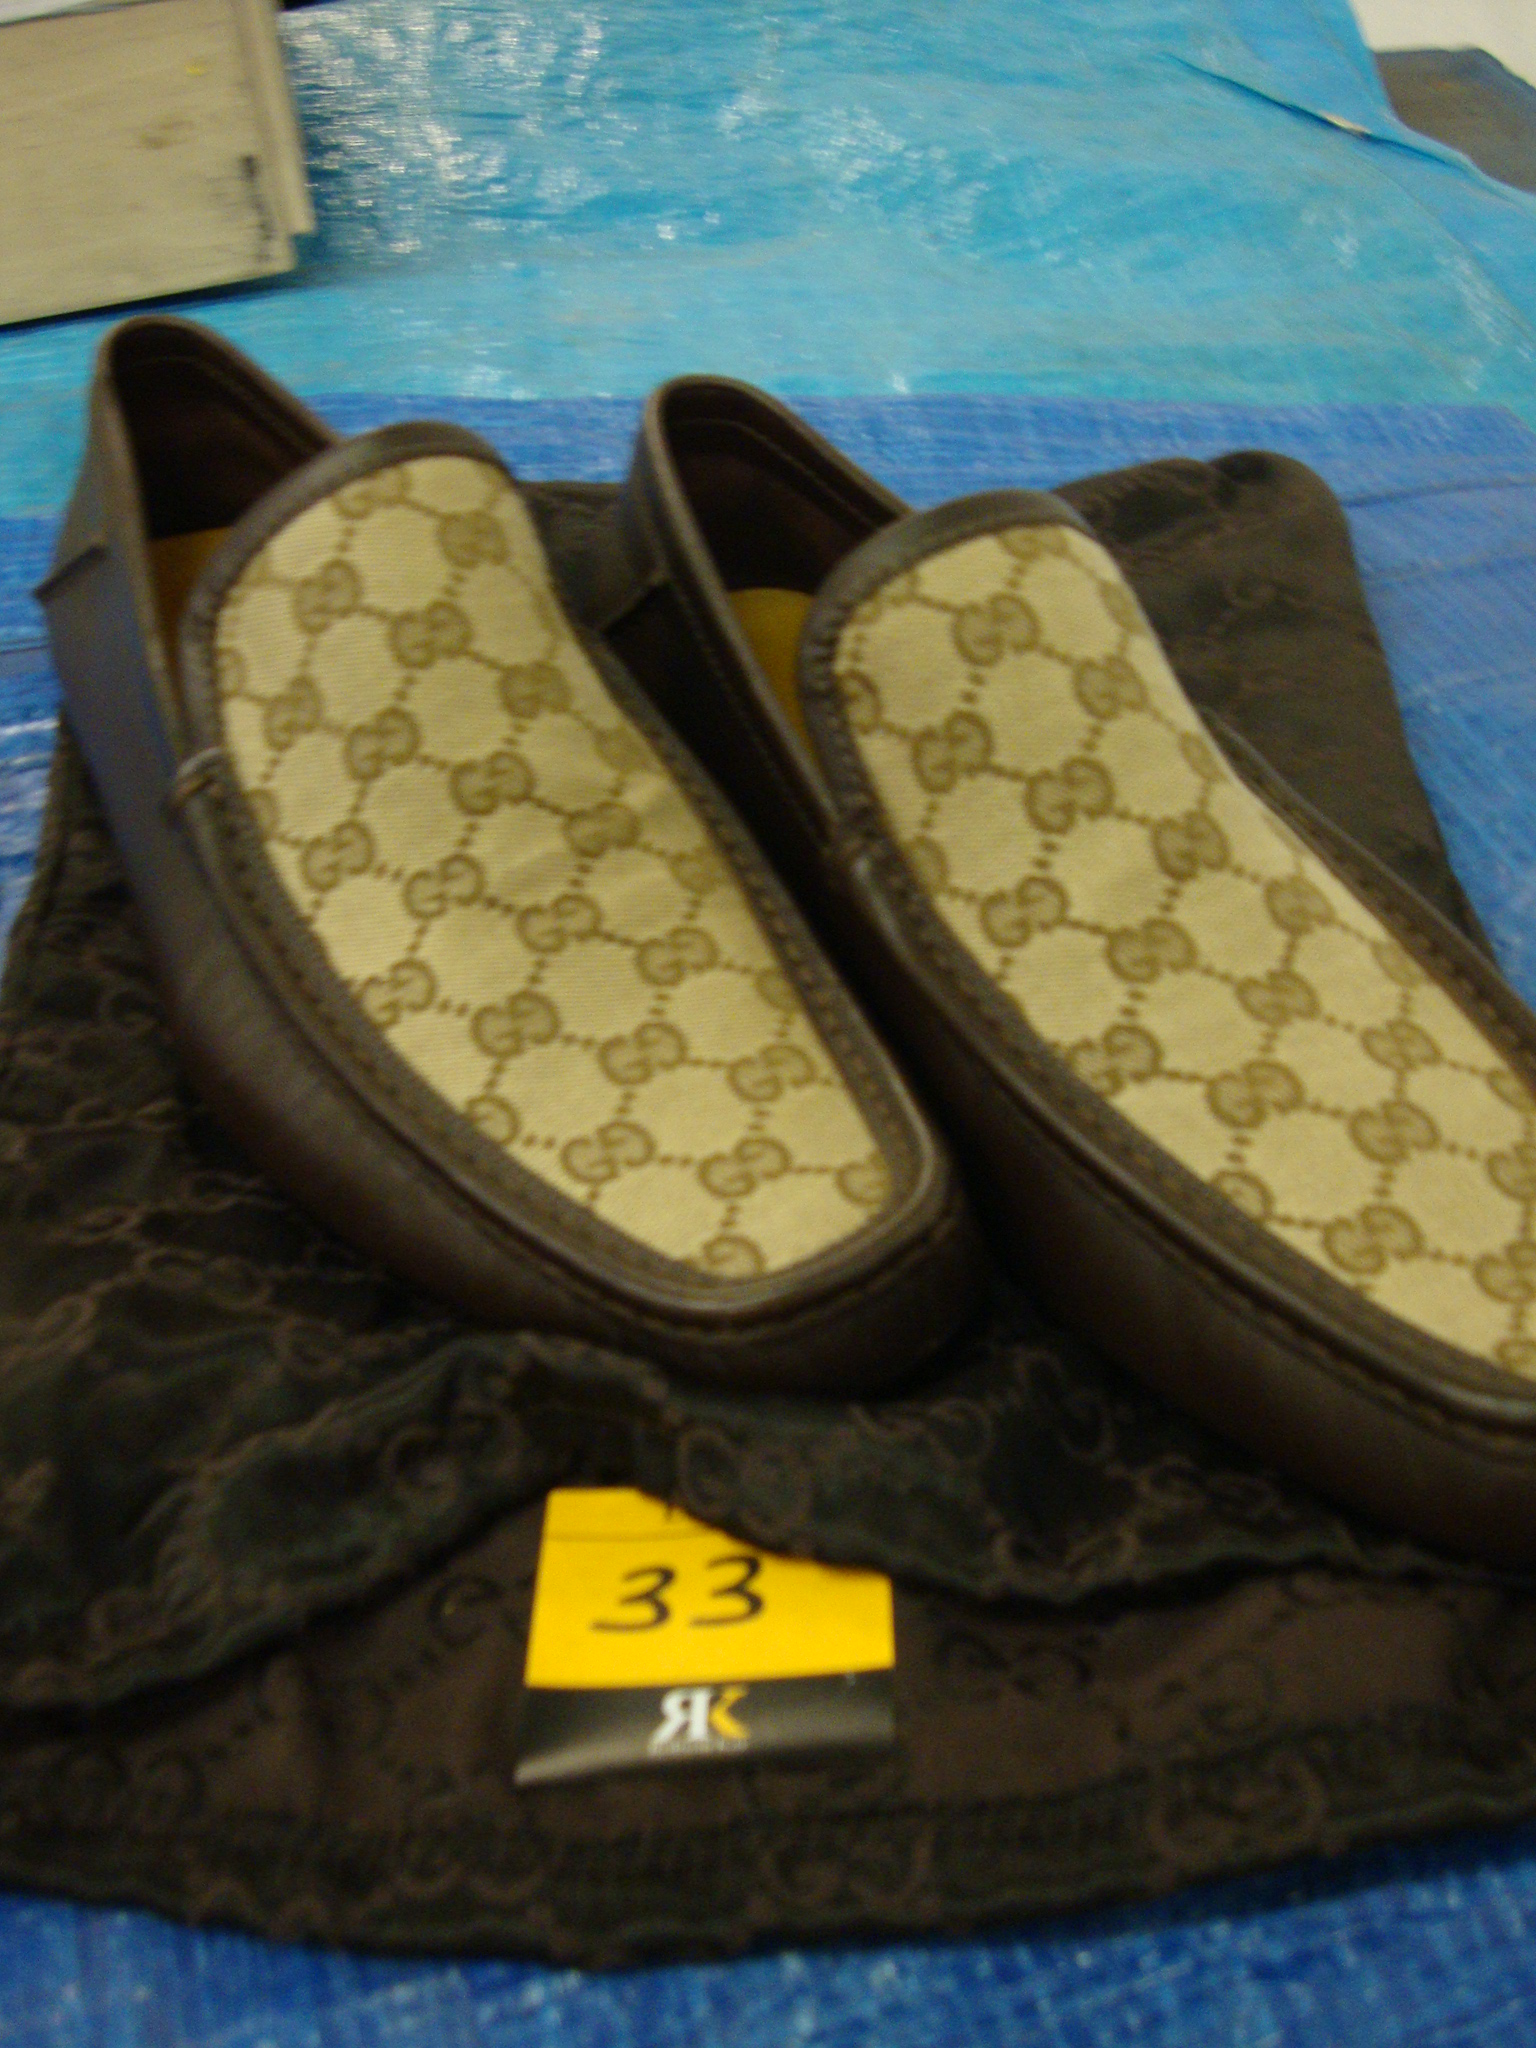 Pair of Gucci men's loafers/driving shoes in chocolate brown leather plus Gucci fabric upper. Size